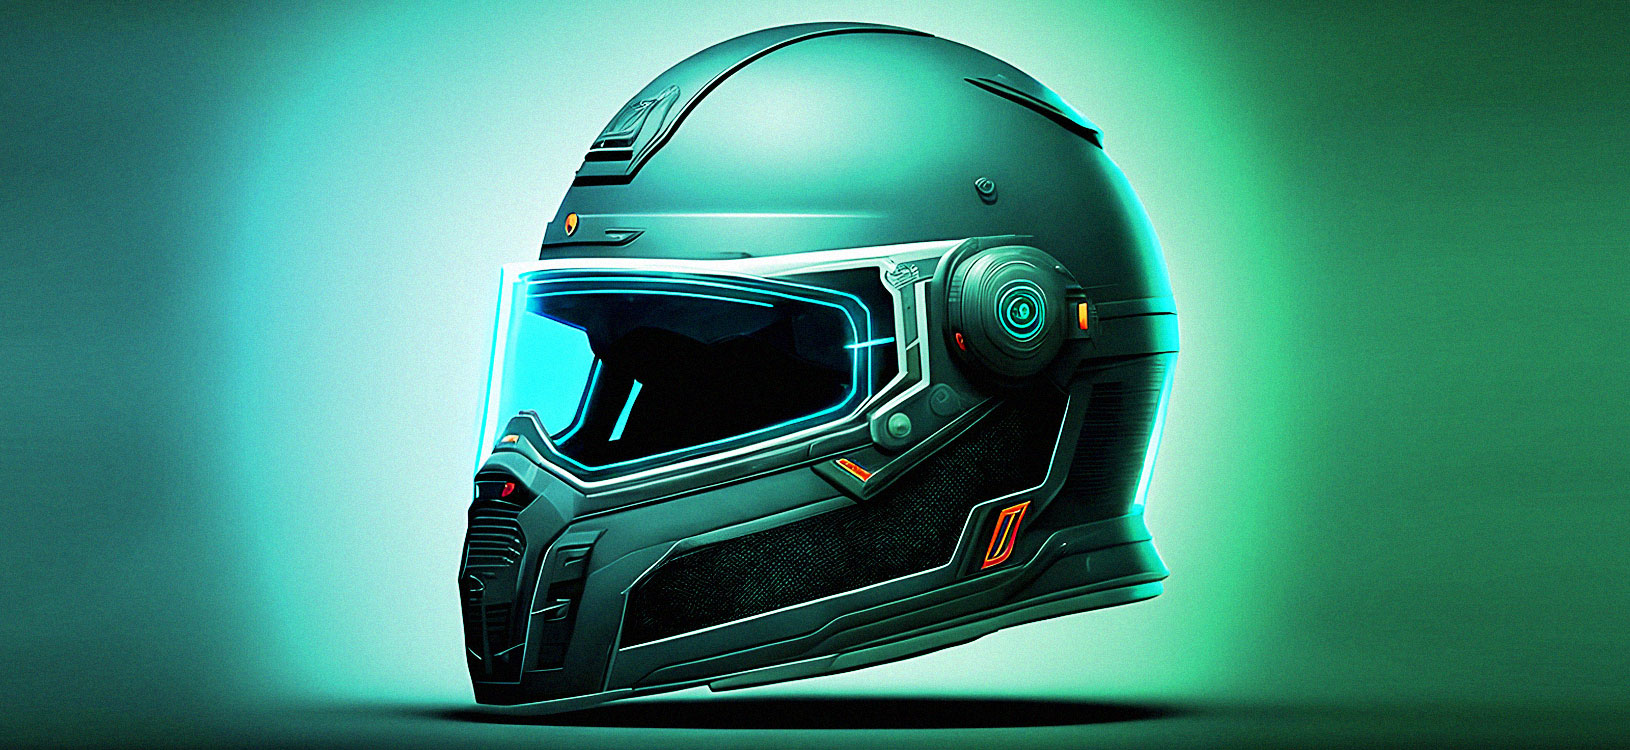 Pilot helmets - from night vision to rear vision